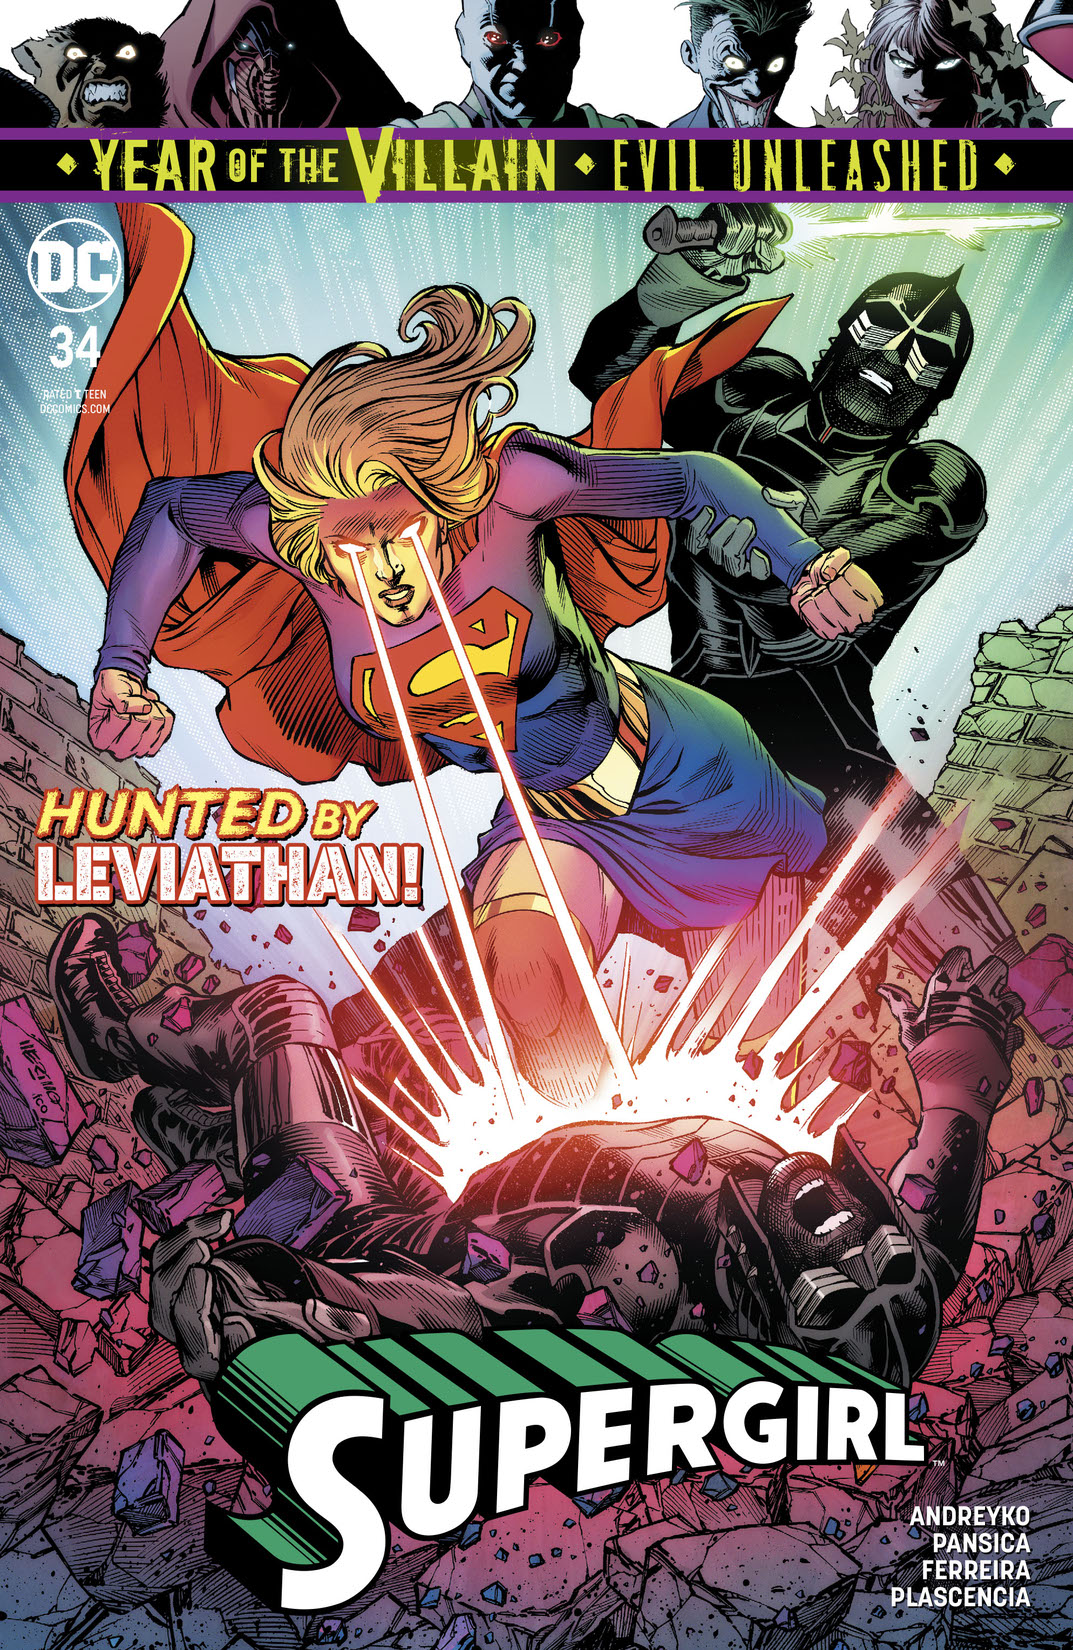 Supergirl (2016-) #34 preview images